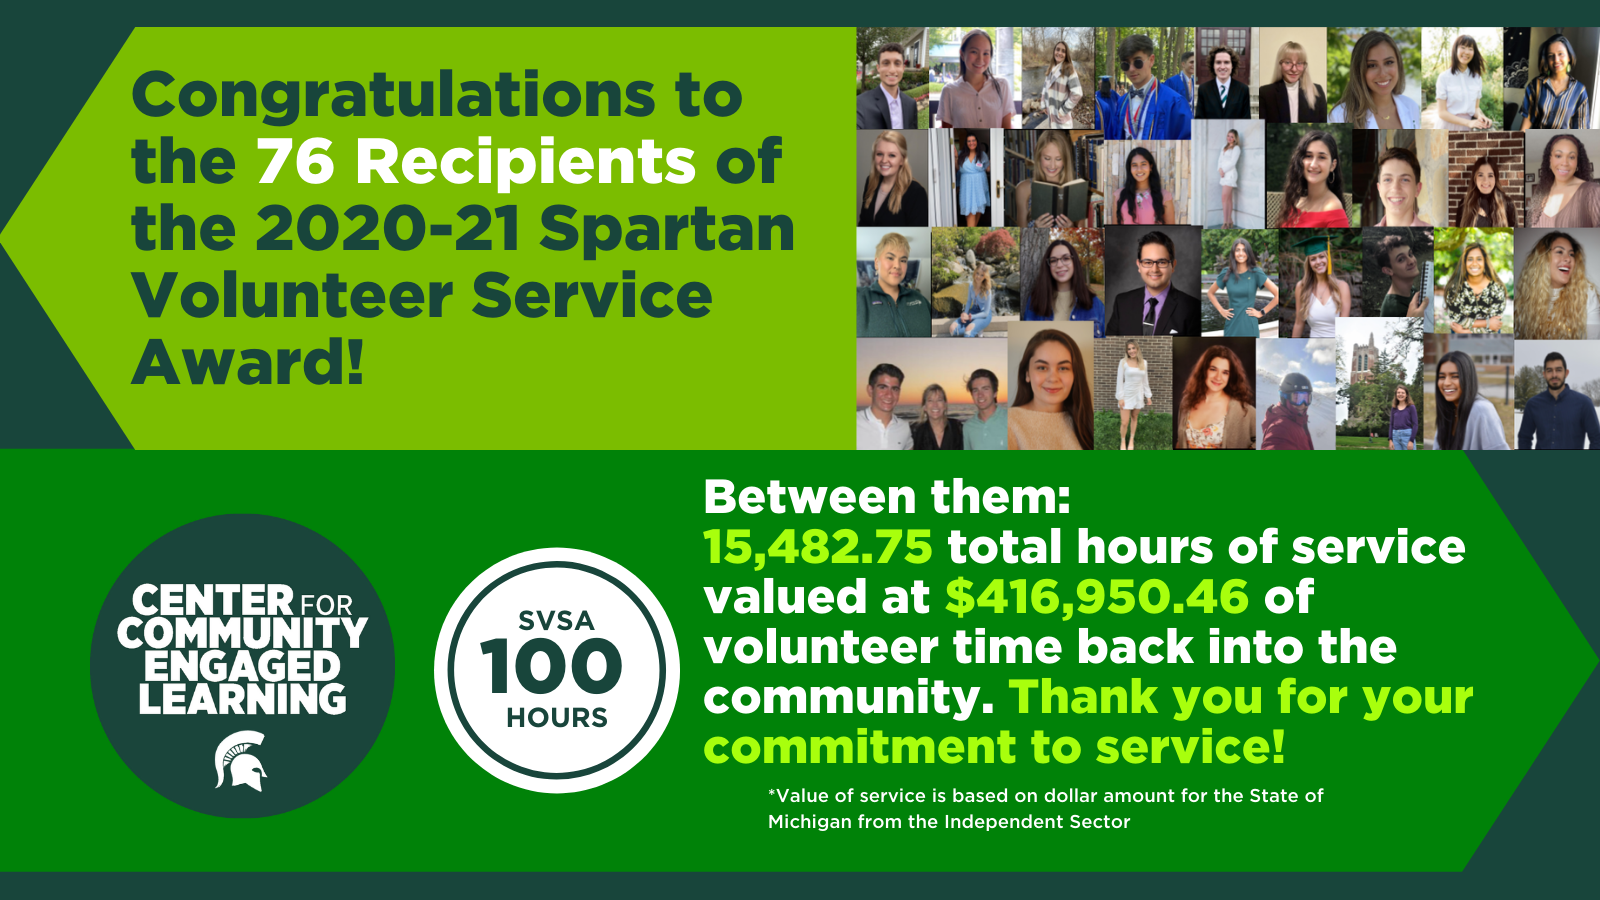 Text: Congratulations to the 76 recipients of the 2020-21 Spartan Volunteer Service Award! Between them:  15,482.75 total hours of service valued at $416,950.46 of volunteer time back into the community. Thank you for your commitment to service!